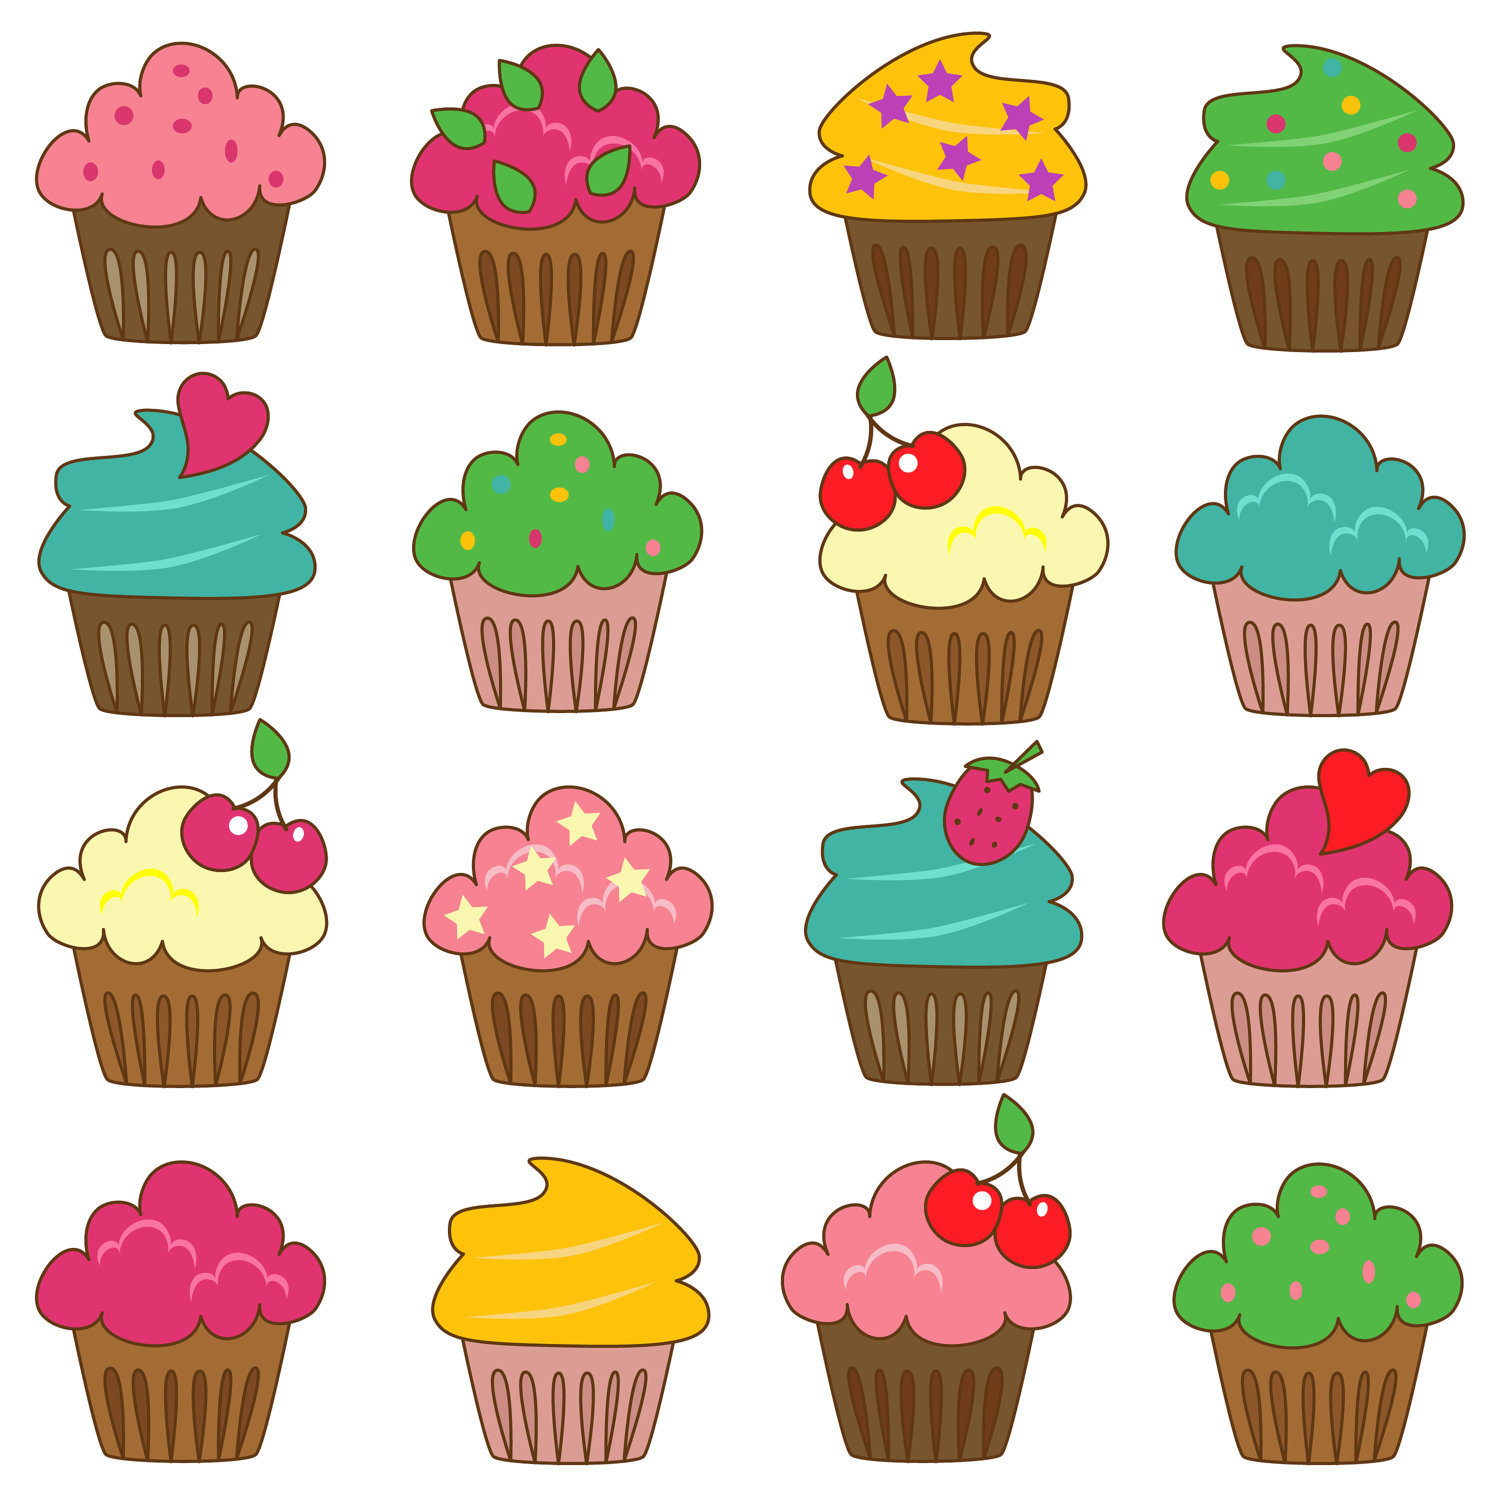 Cupcakes Clipart Border | Clipart Panda - Free Clipart Images